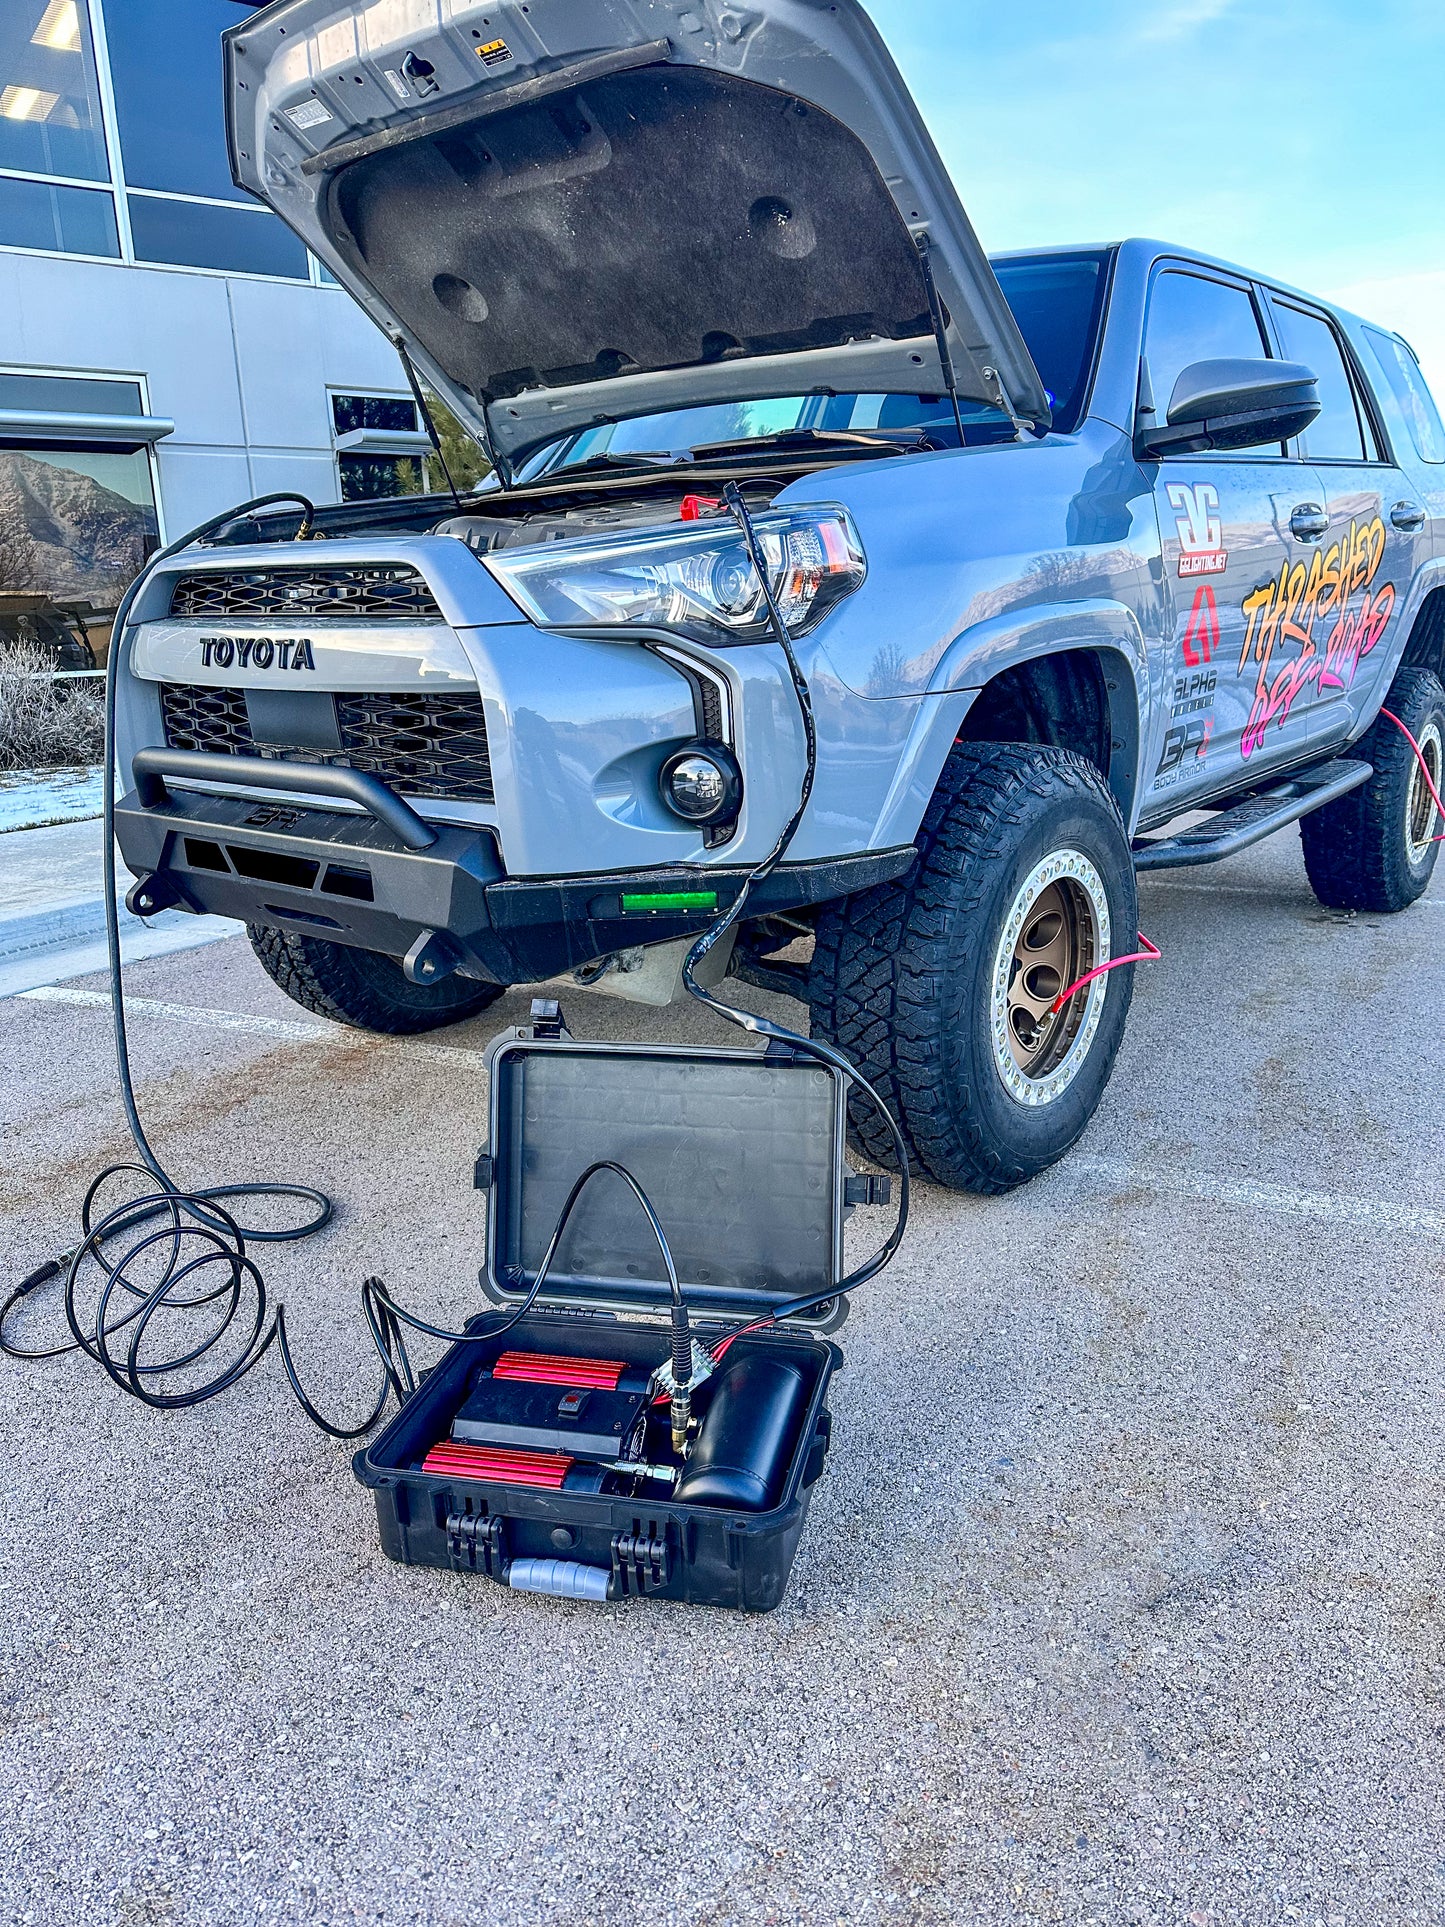 Thrashed Off-Road Portable Twin Motor Air Compressor